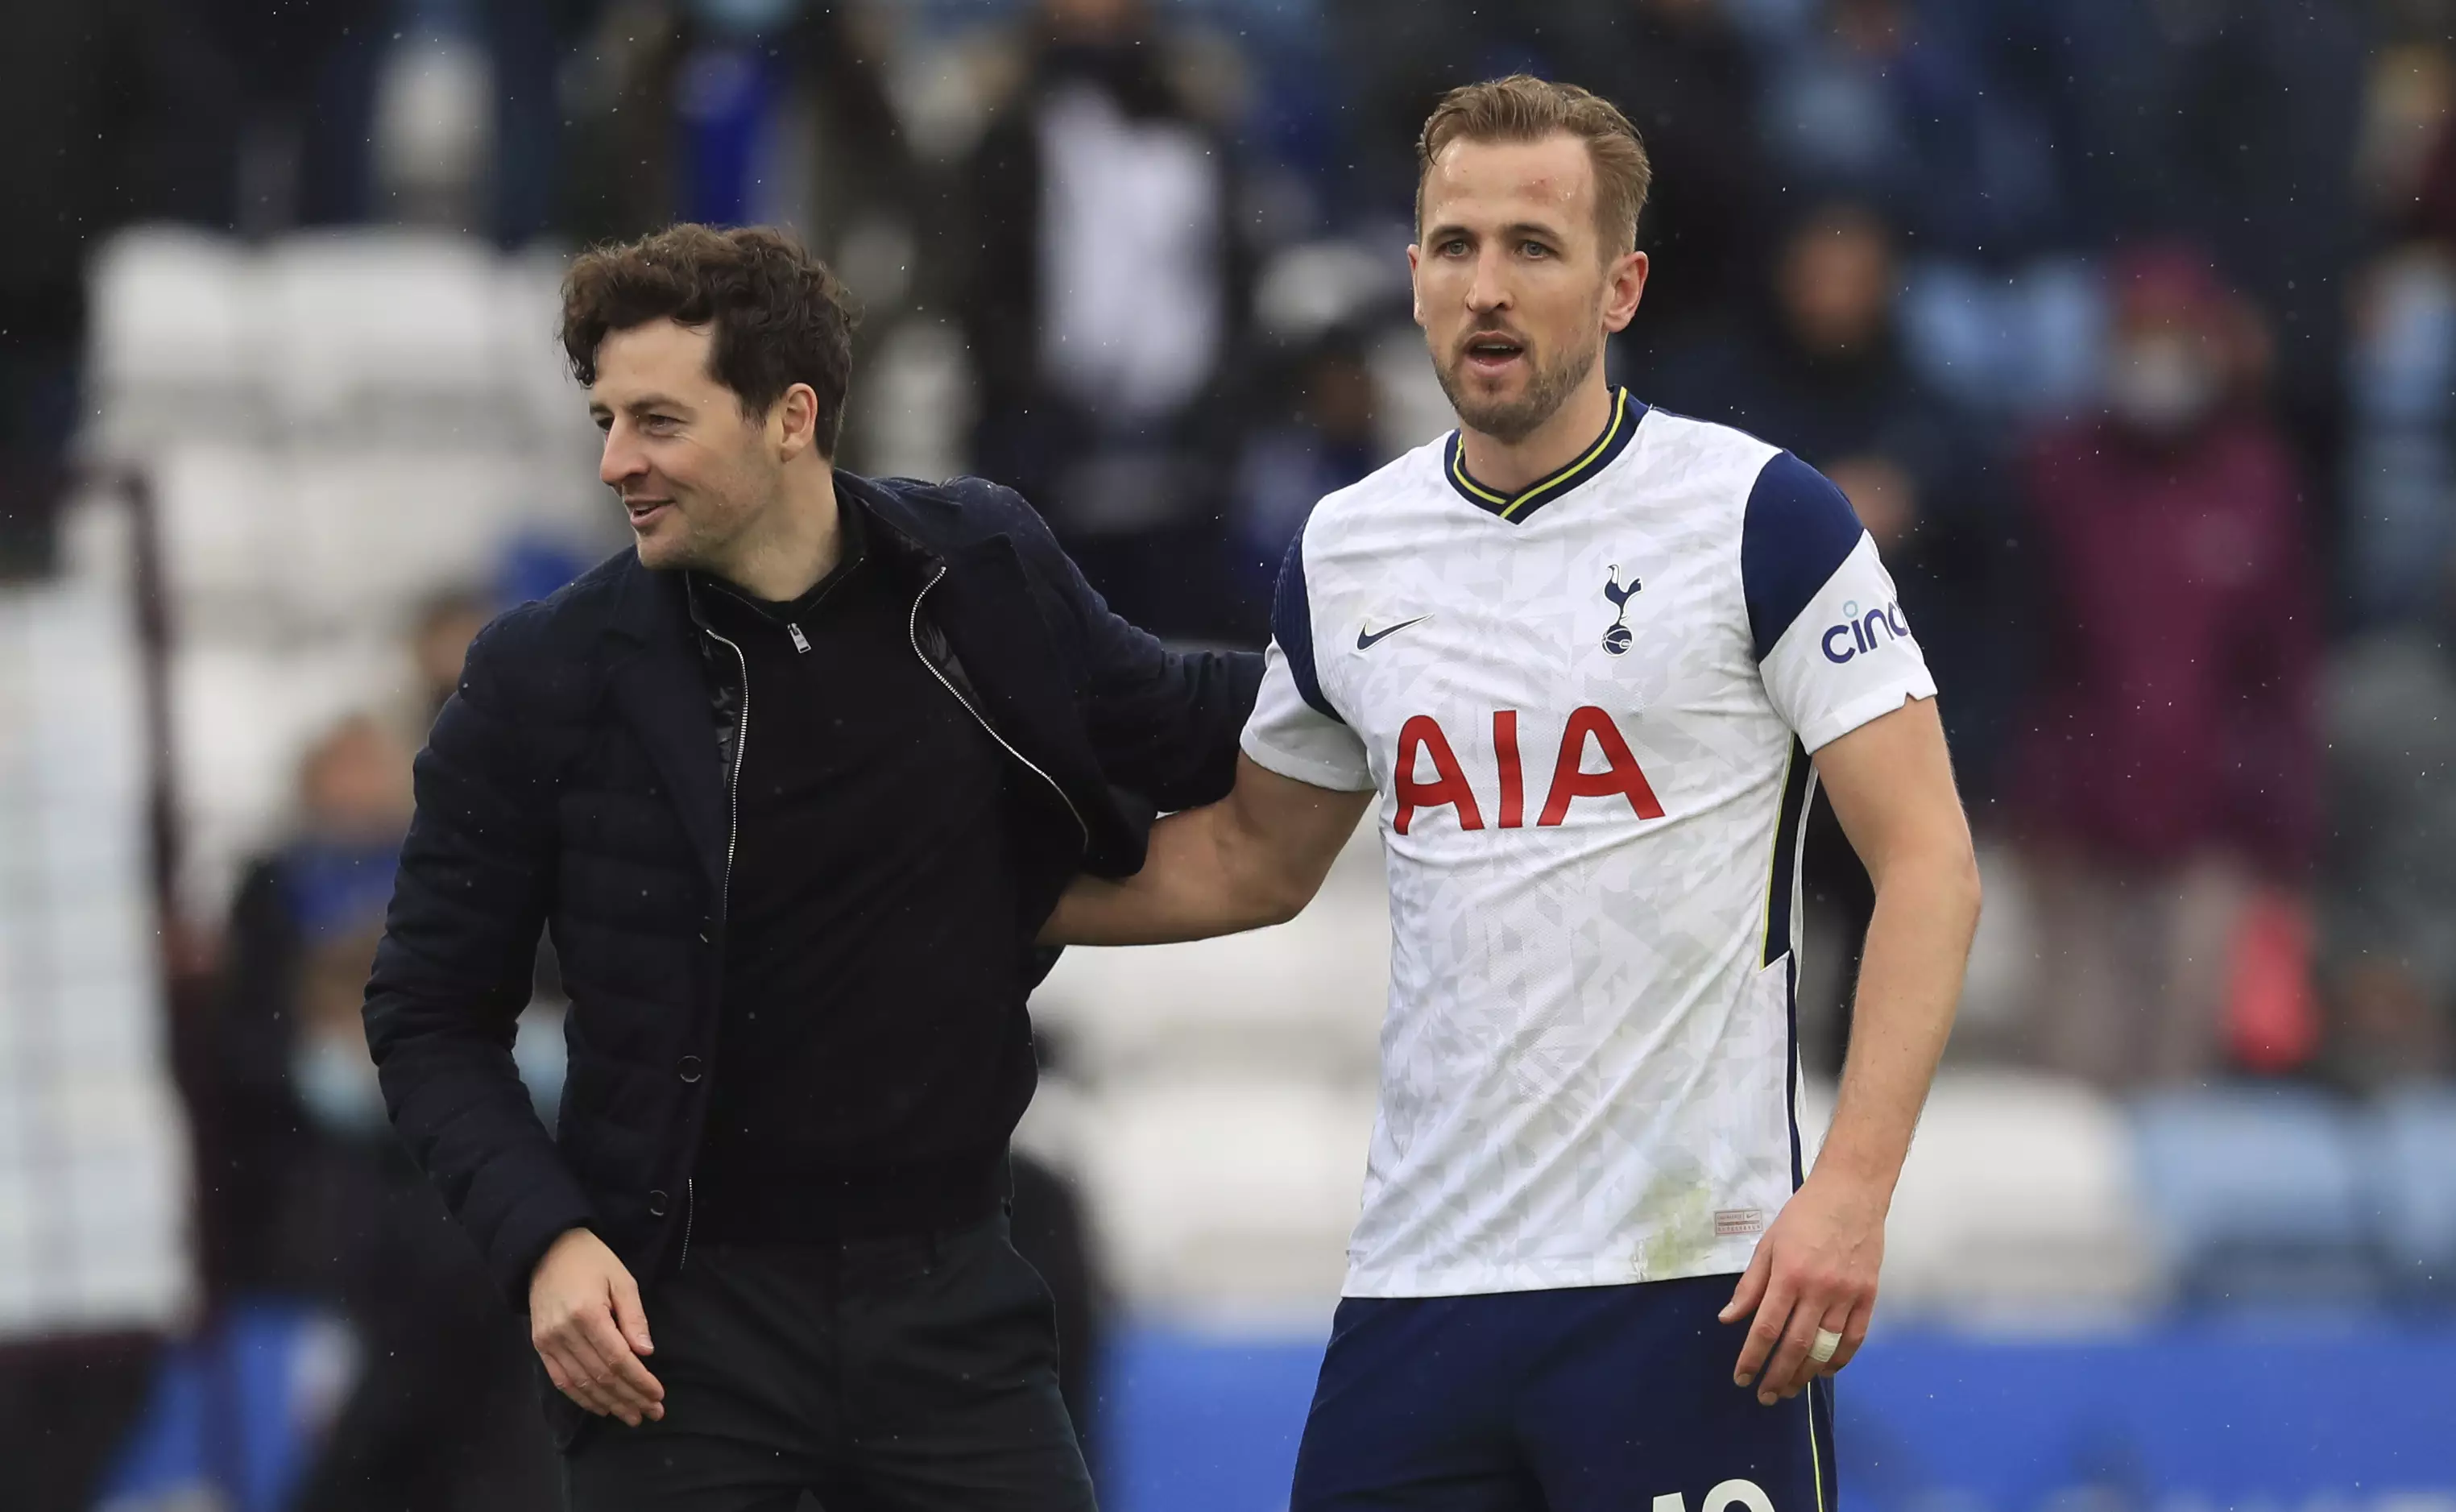 Ryan Mason, who was in charge of Spurs after Mourinho left, with Harry Kane on the final day of the season. Image: PA Images